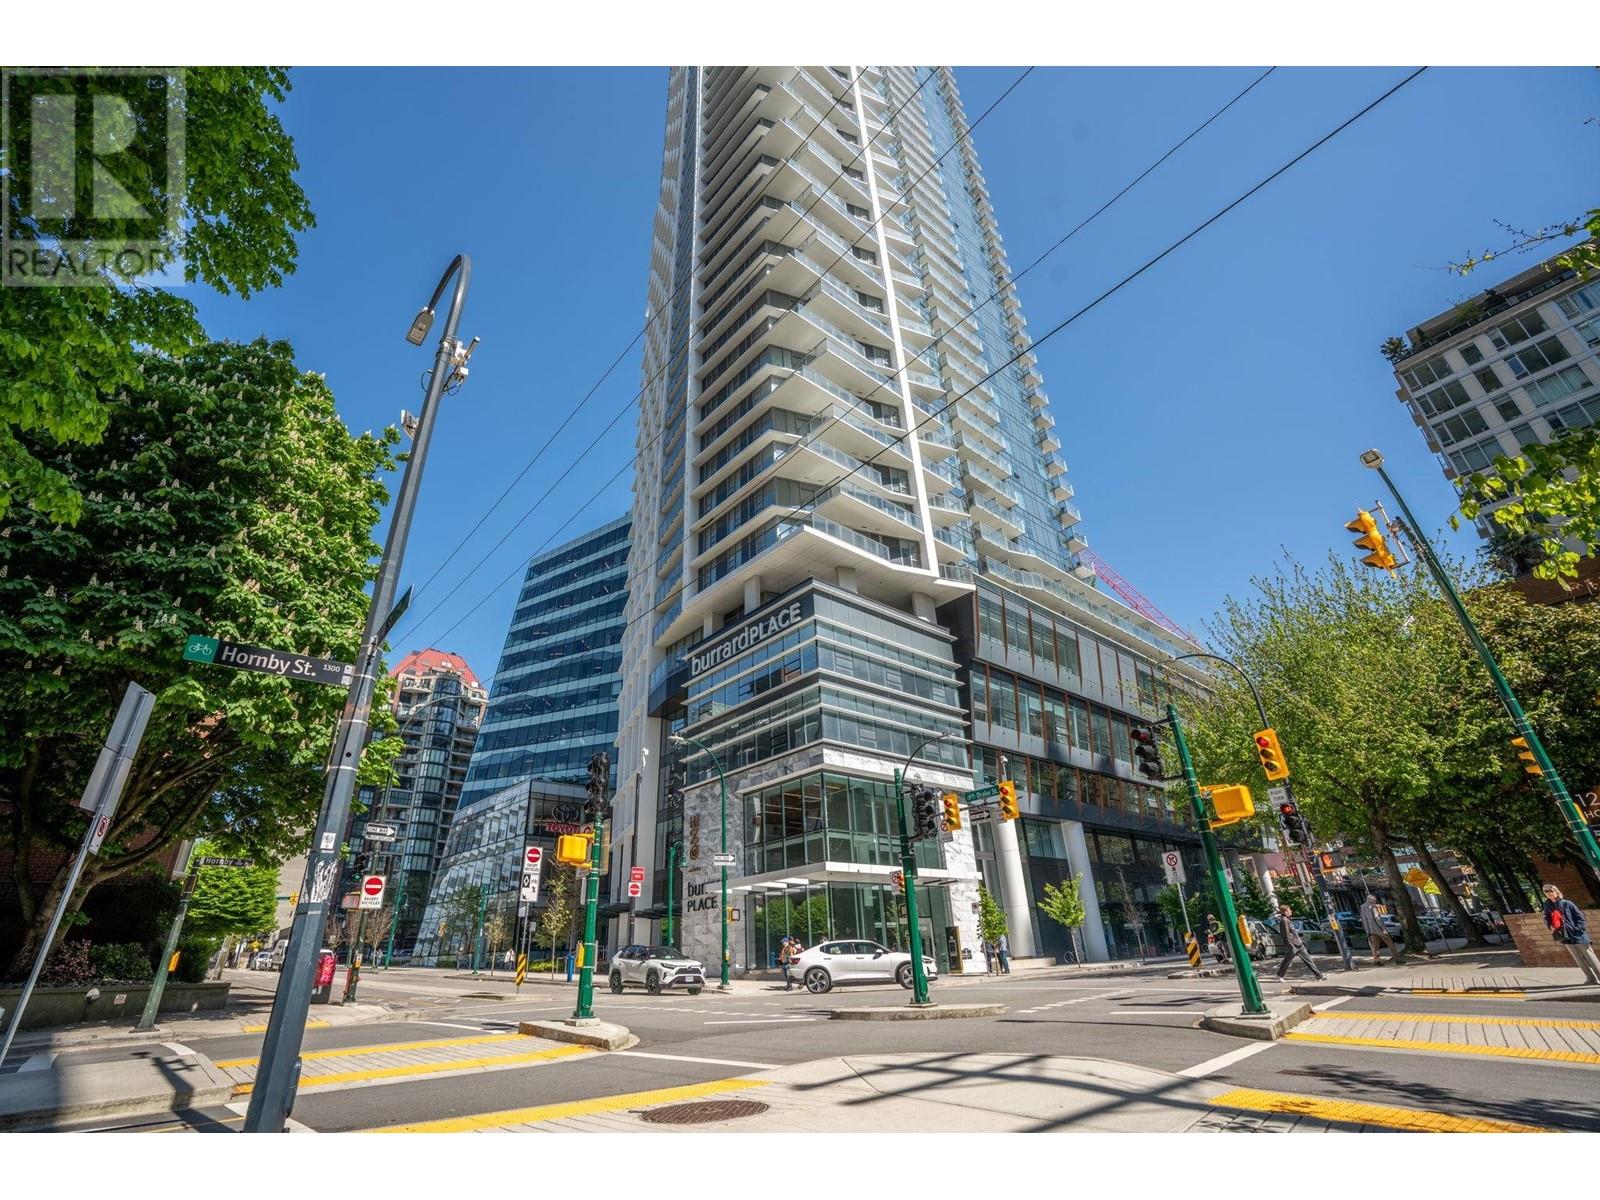 2911 1289 HORNBY STREET, vancouver, British Columbia